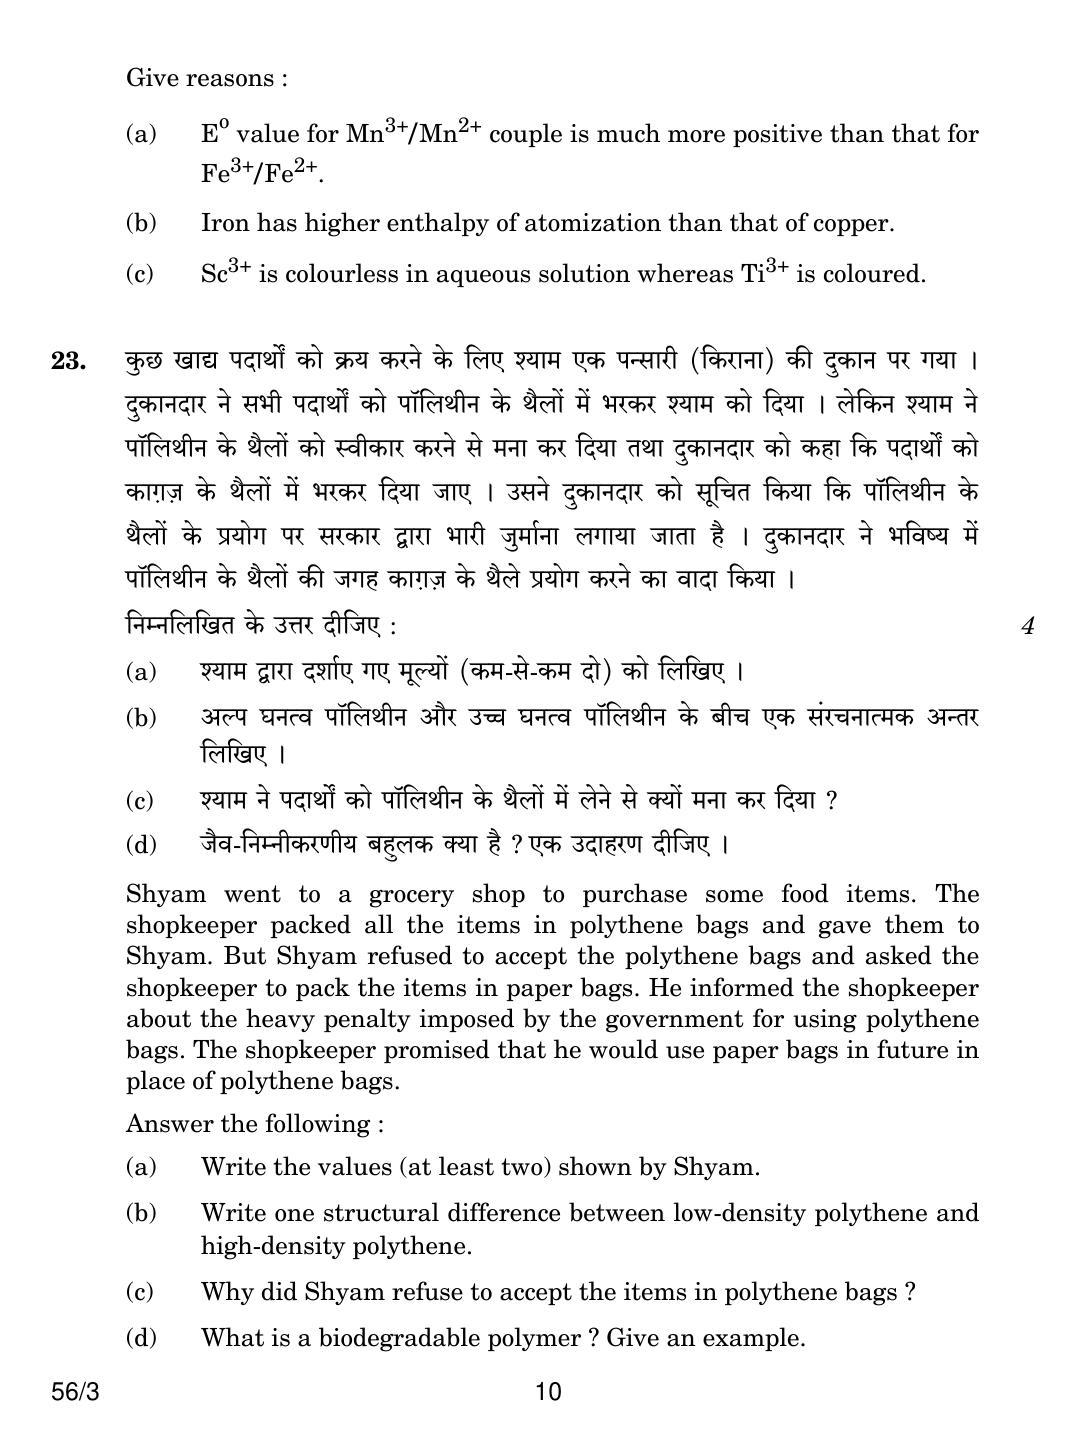 CBSE Class 12 56-3 CHEMISTRY 2018 Question Paper - Page 10